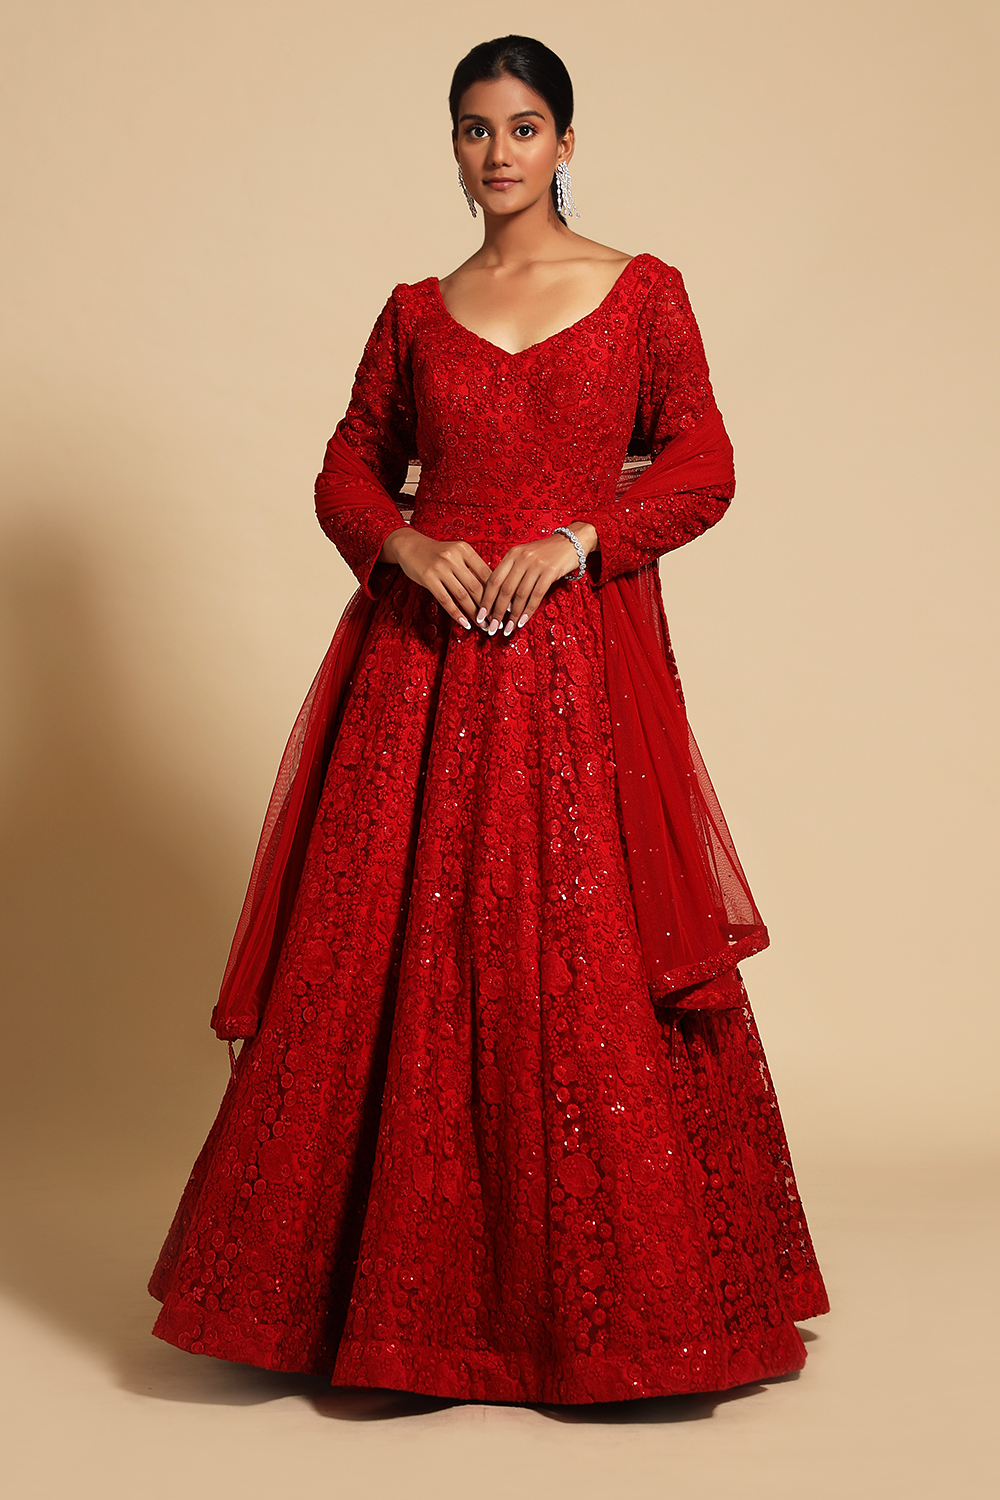 Indian bridal gown designers you need to check out